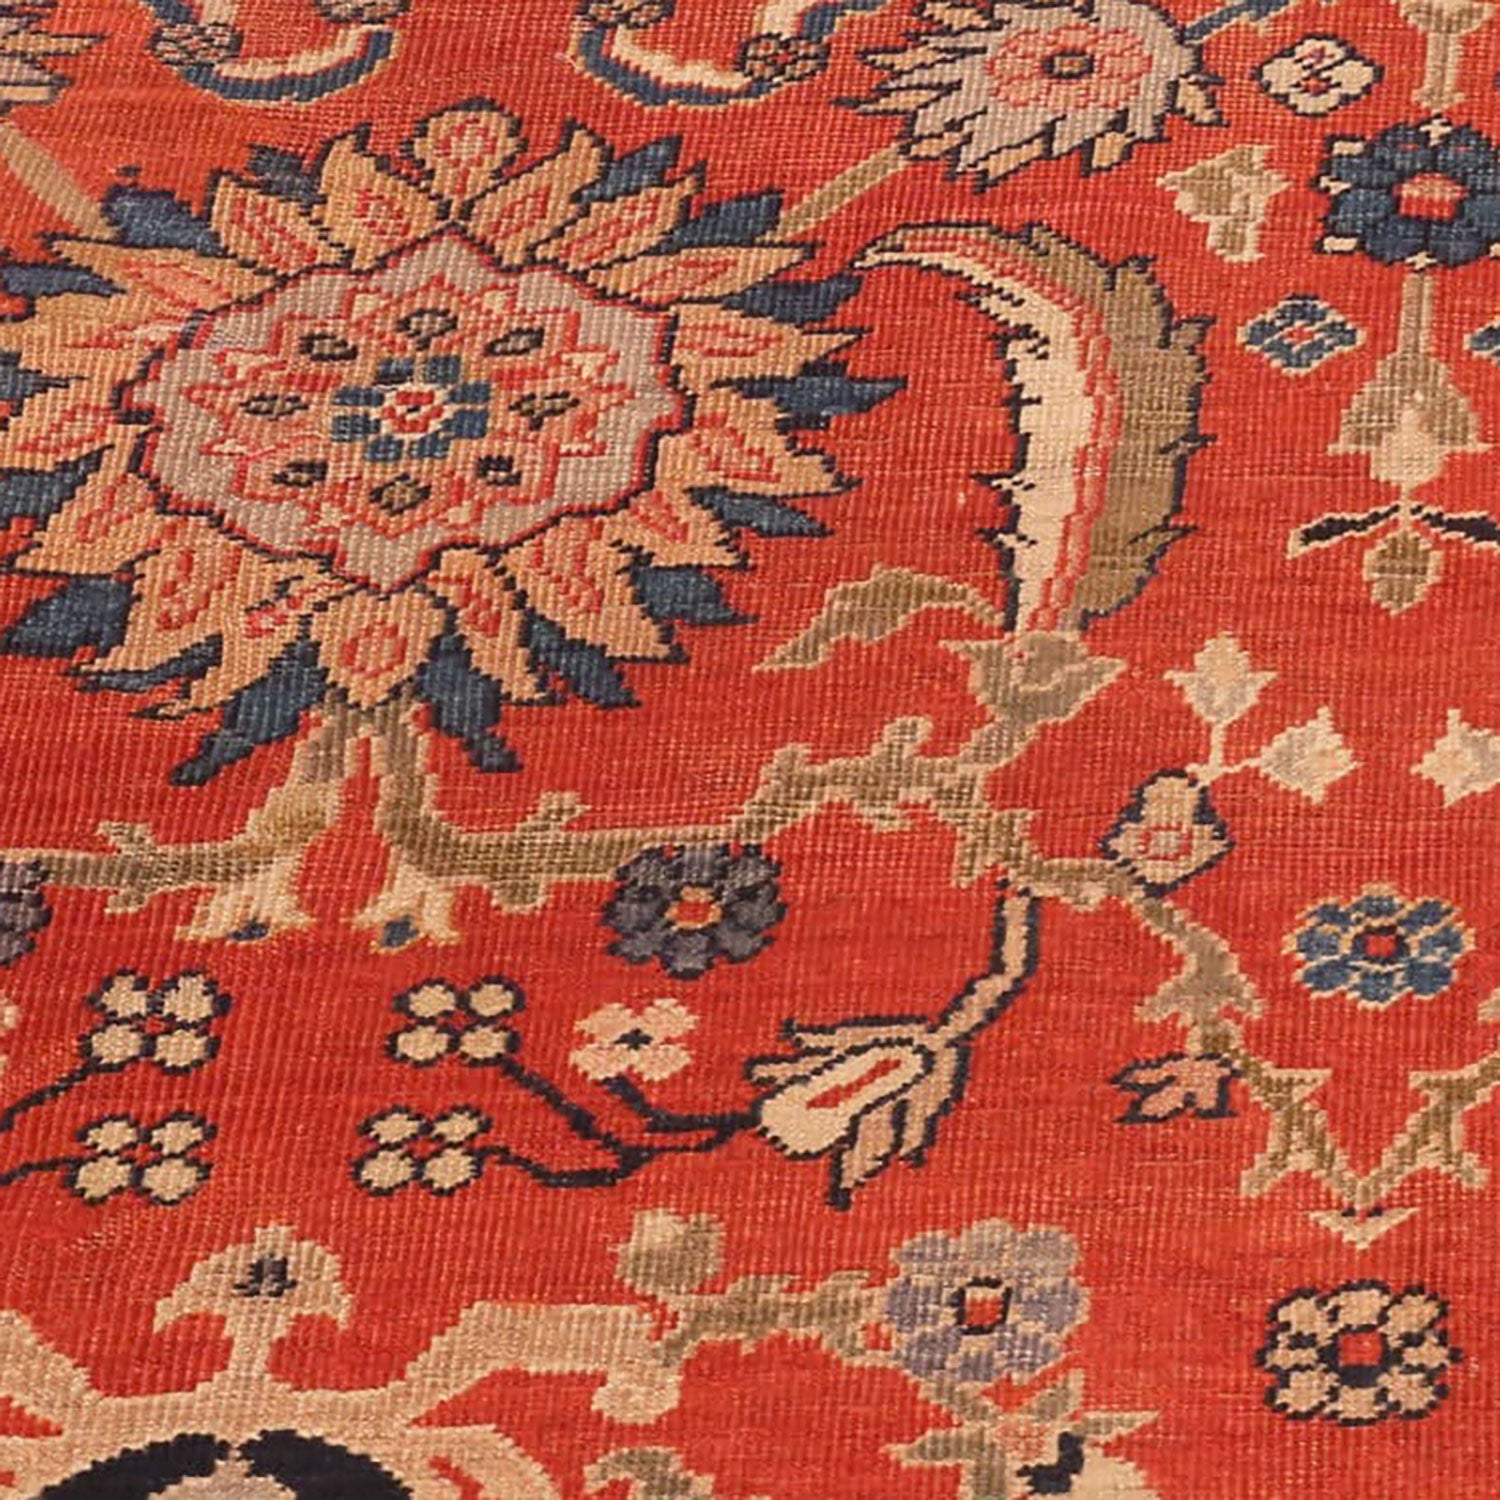 Intricate floral design in vibrant colors on a high-quality rug.